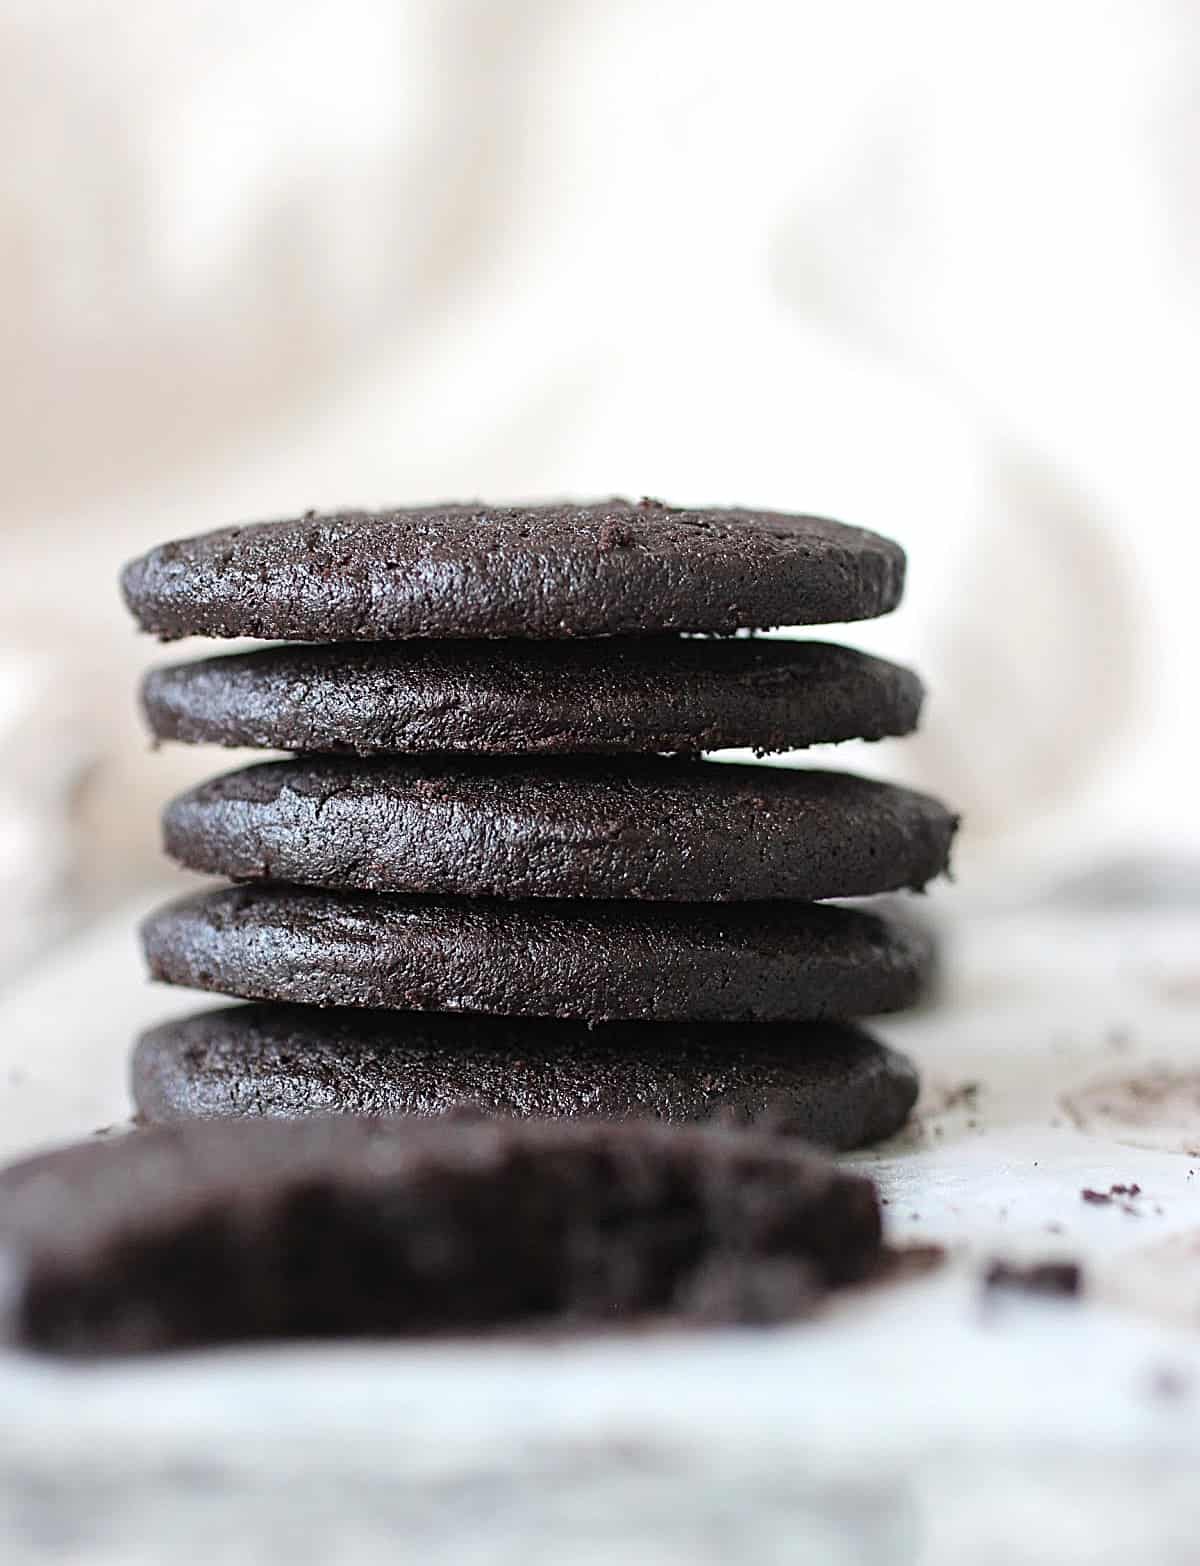 Stack of several chocolate cookie rounds, light colored background.